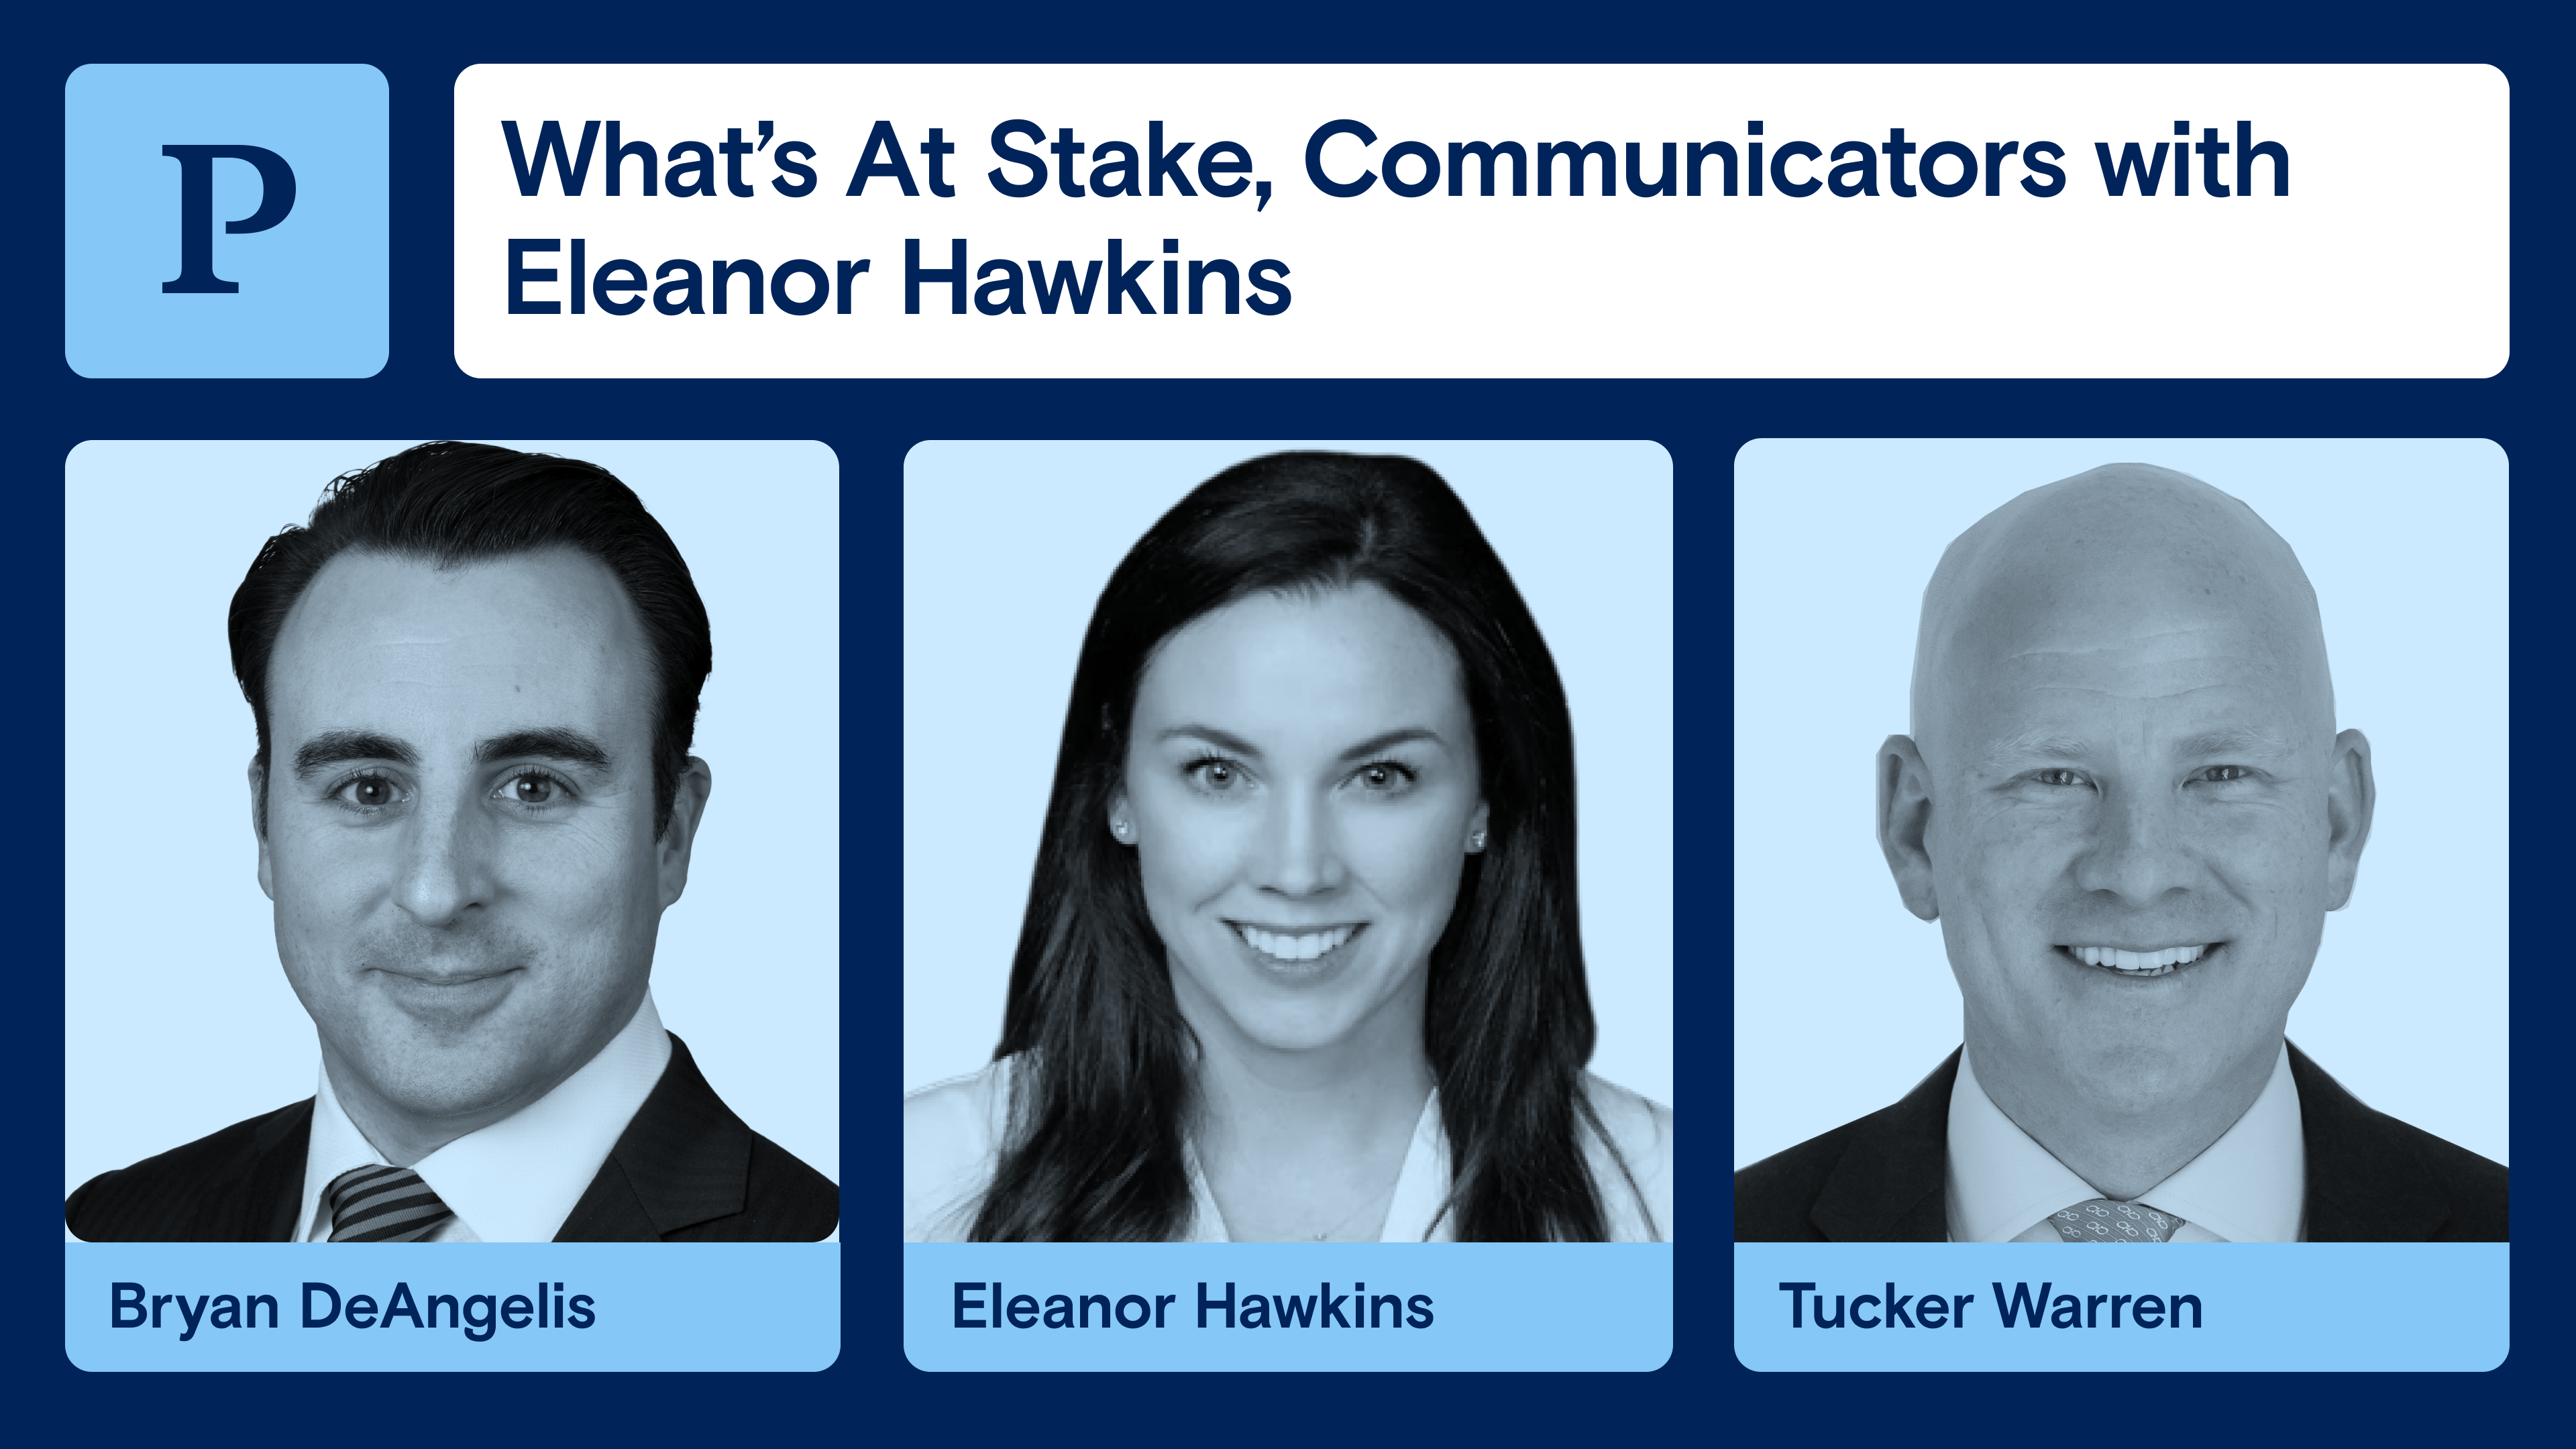 What's At Stake, Communicators with Eleanor Hawkins